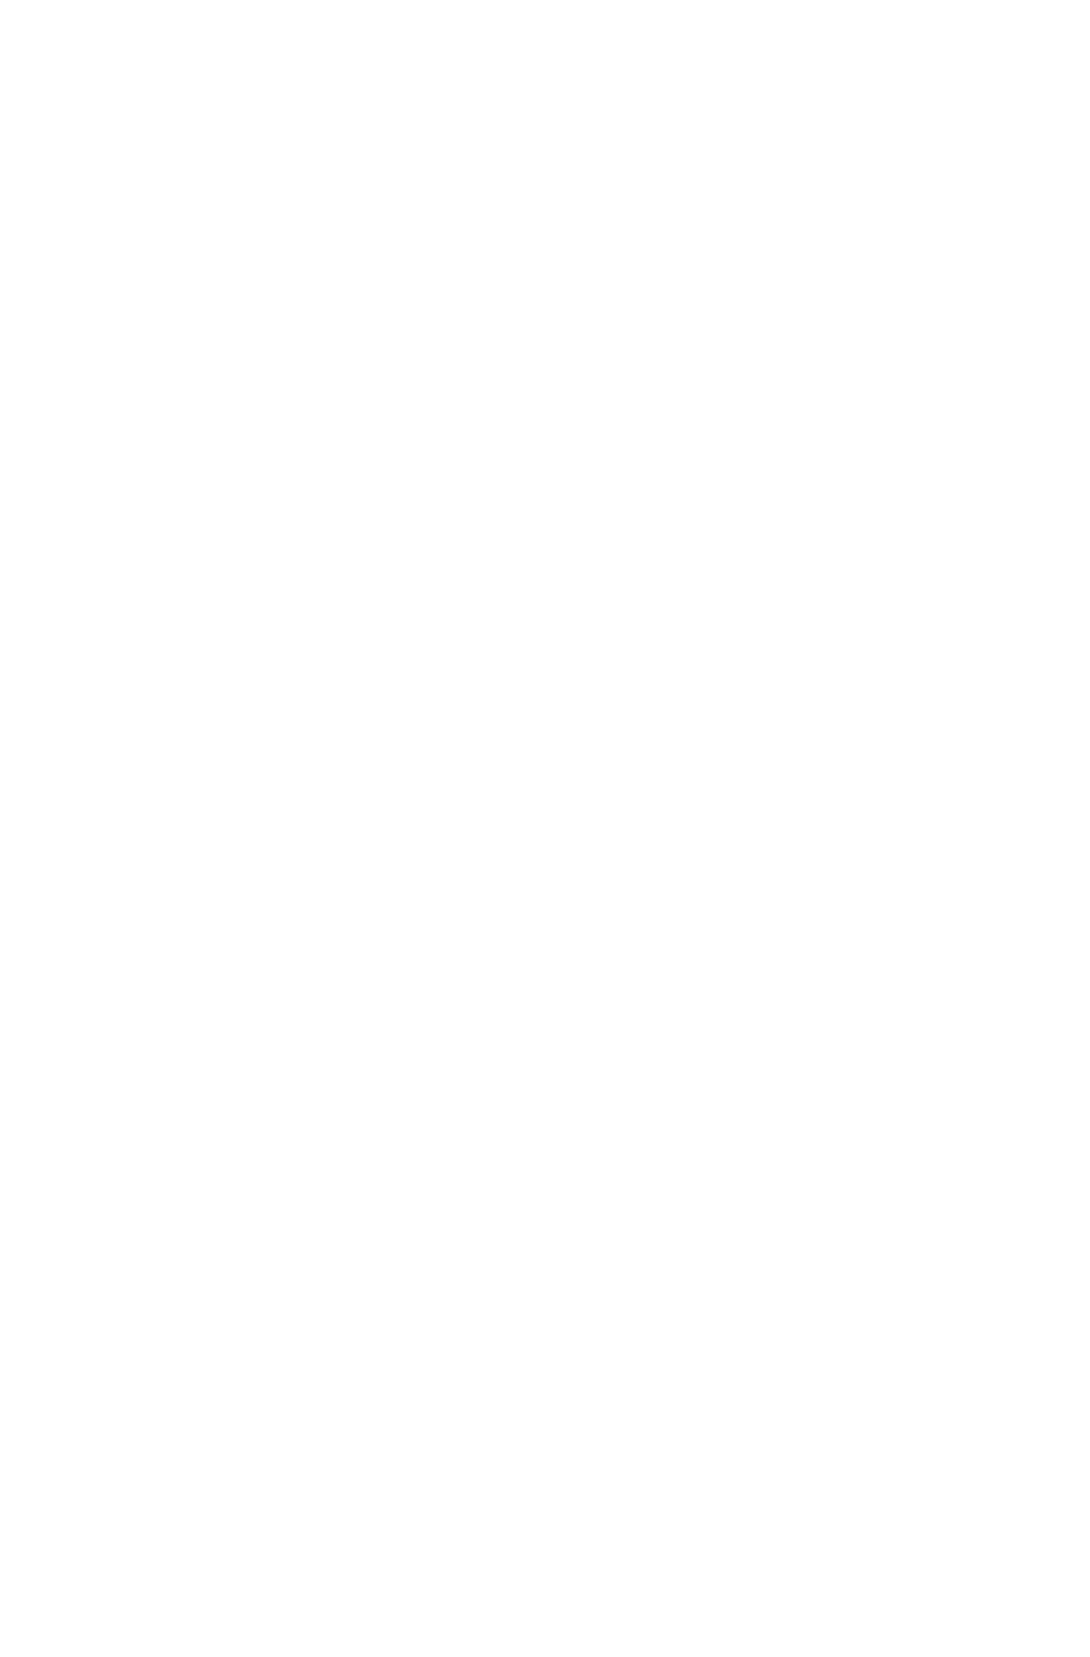 ONE BY ONE